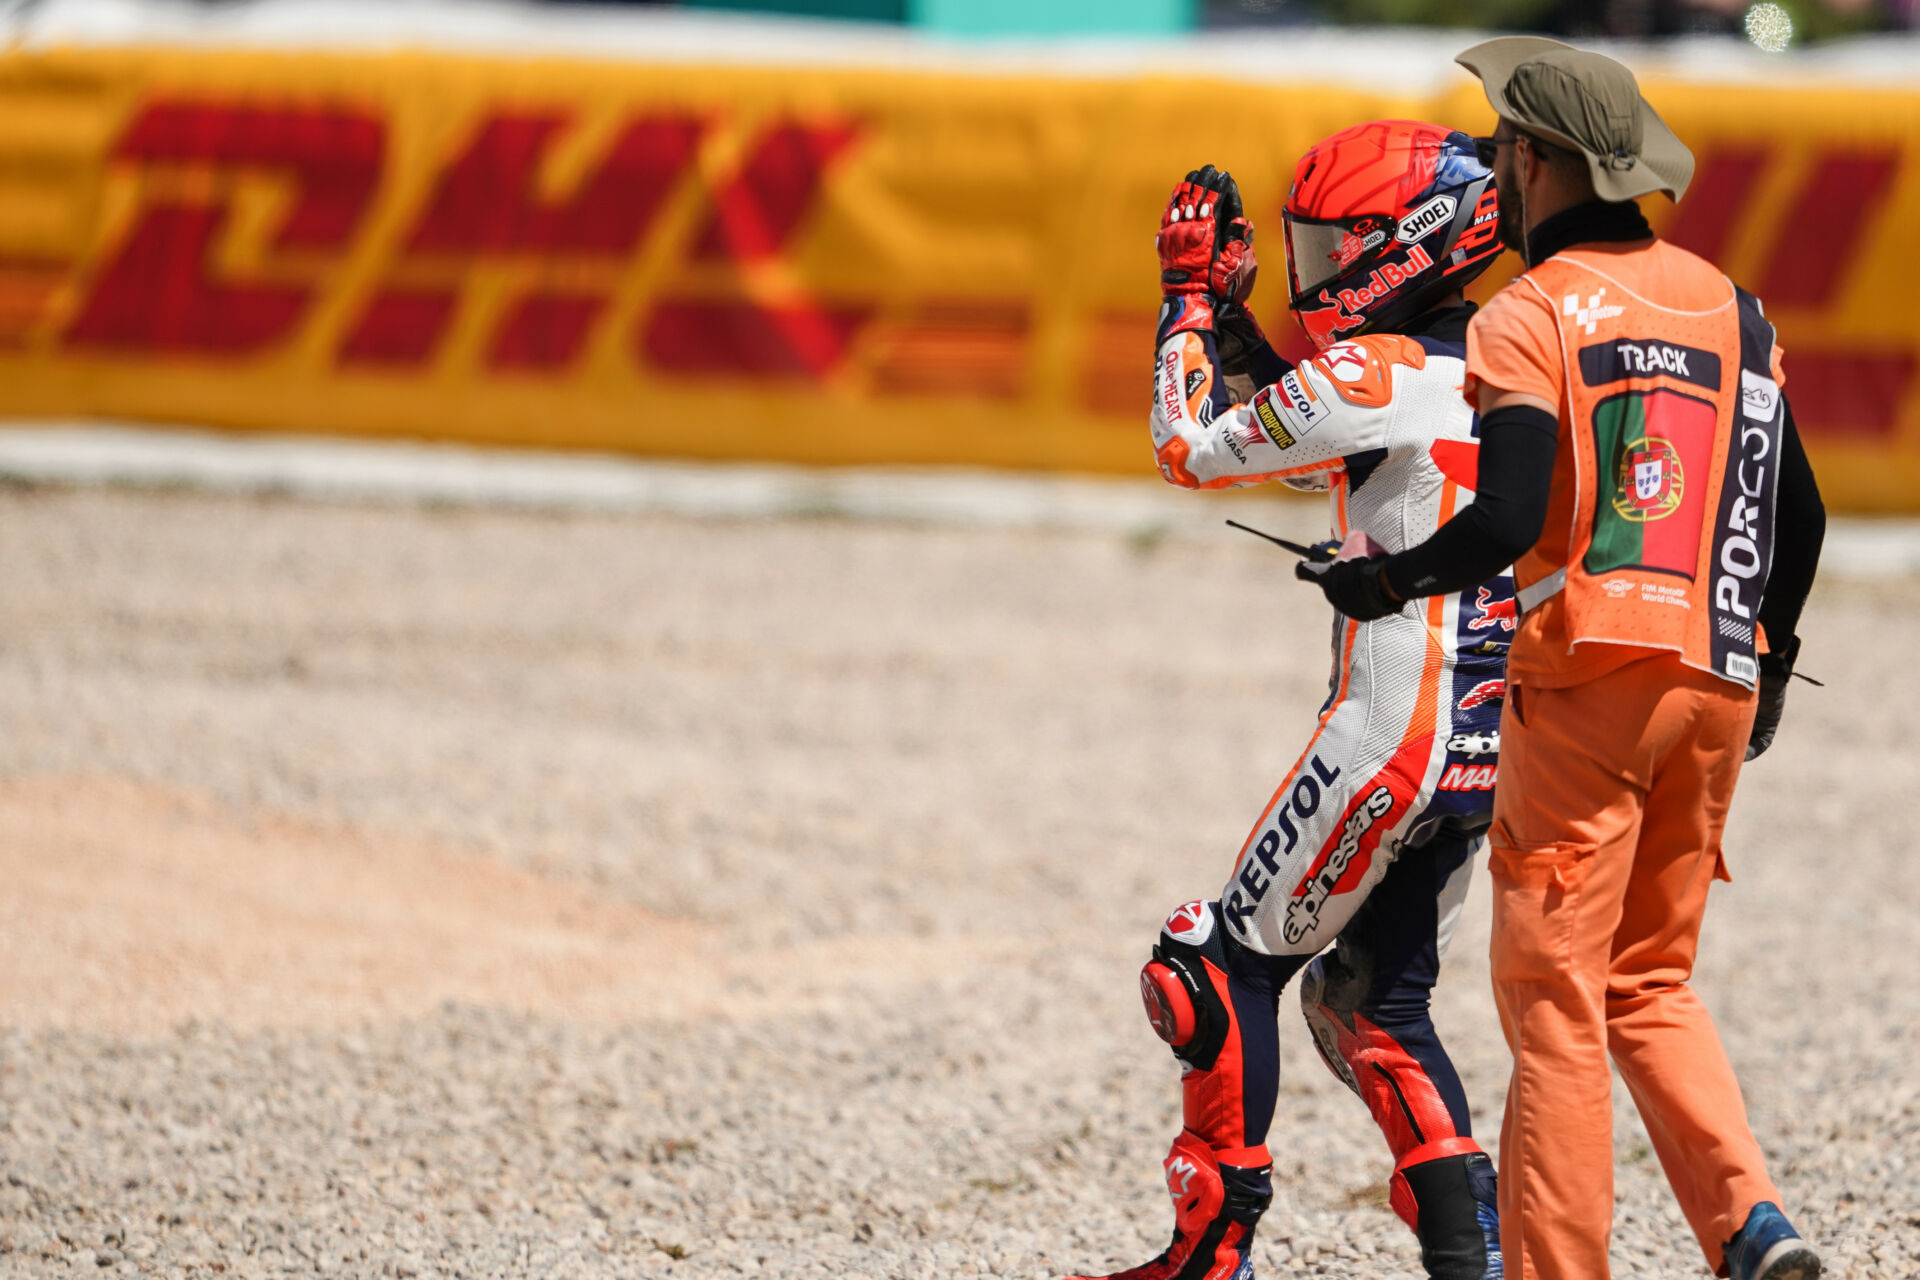 Marc Marquez, after colliding with Miguel Oliveira at Algarve International Circuit, in Portugal. Photo courtesy Repsol Honda.